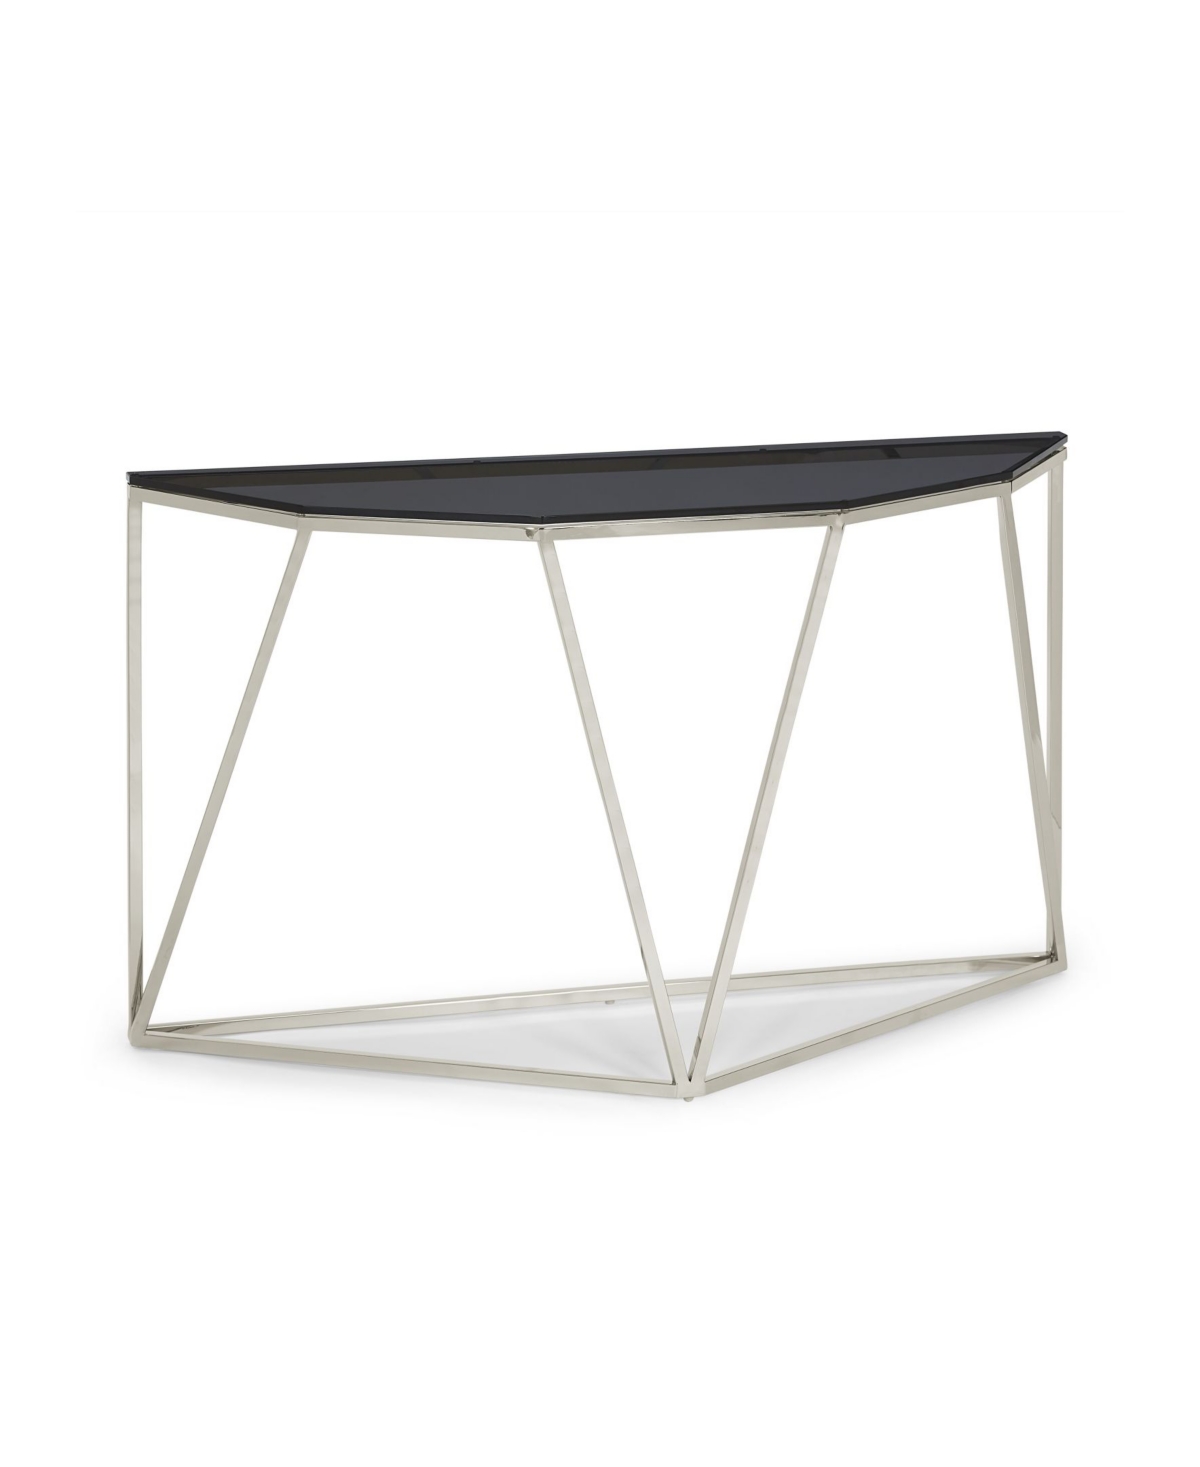 Macy's Aria 55" Smoked Glass And Polished Stainless Steel Console Table In Pol Stainless Steel,smoked Glass